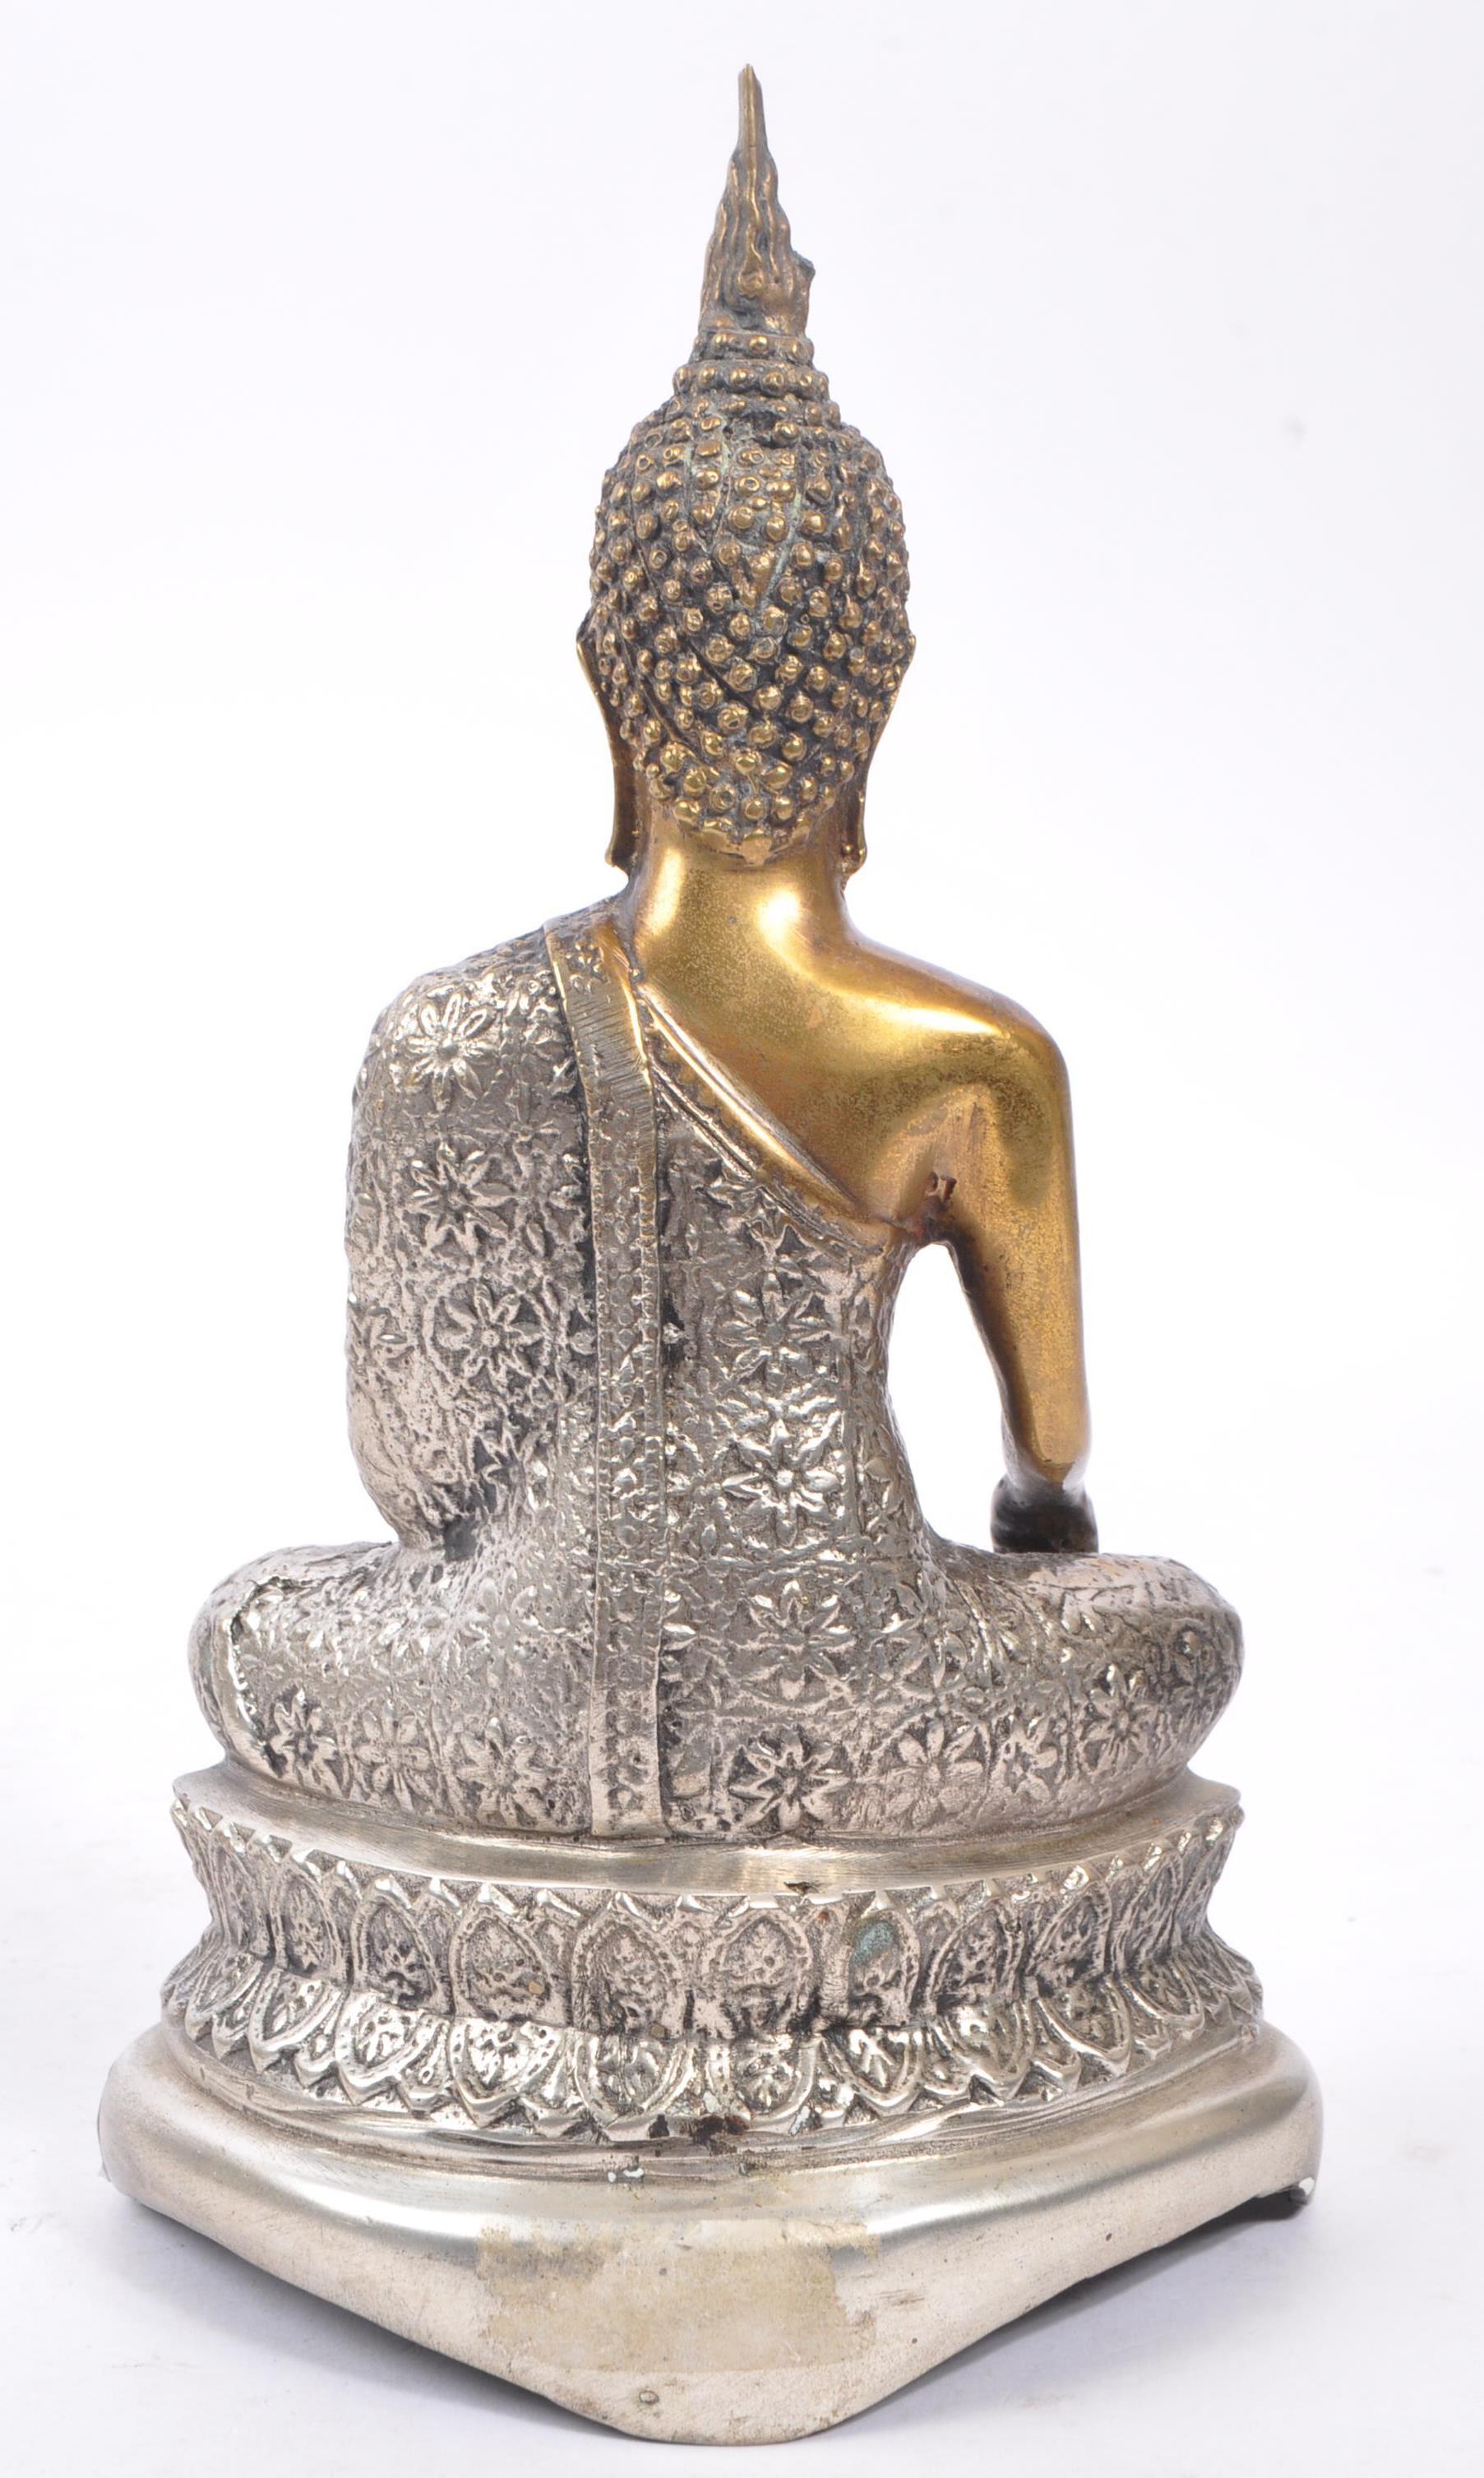 PAINTED GOLD AND SILVER BRONZE BUDDHA FIGURE - Image 3 of 7